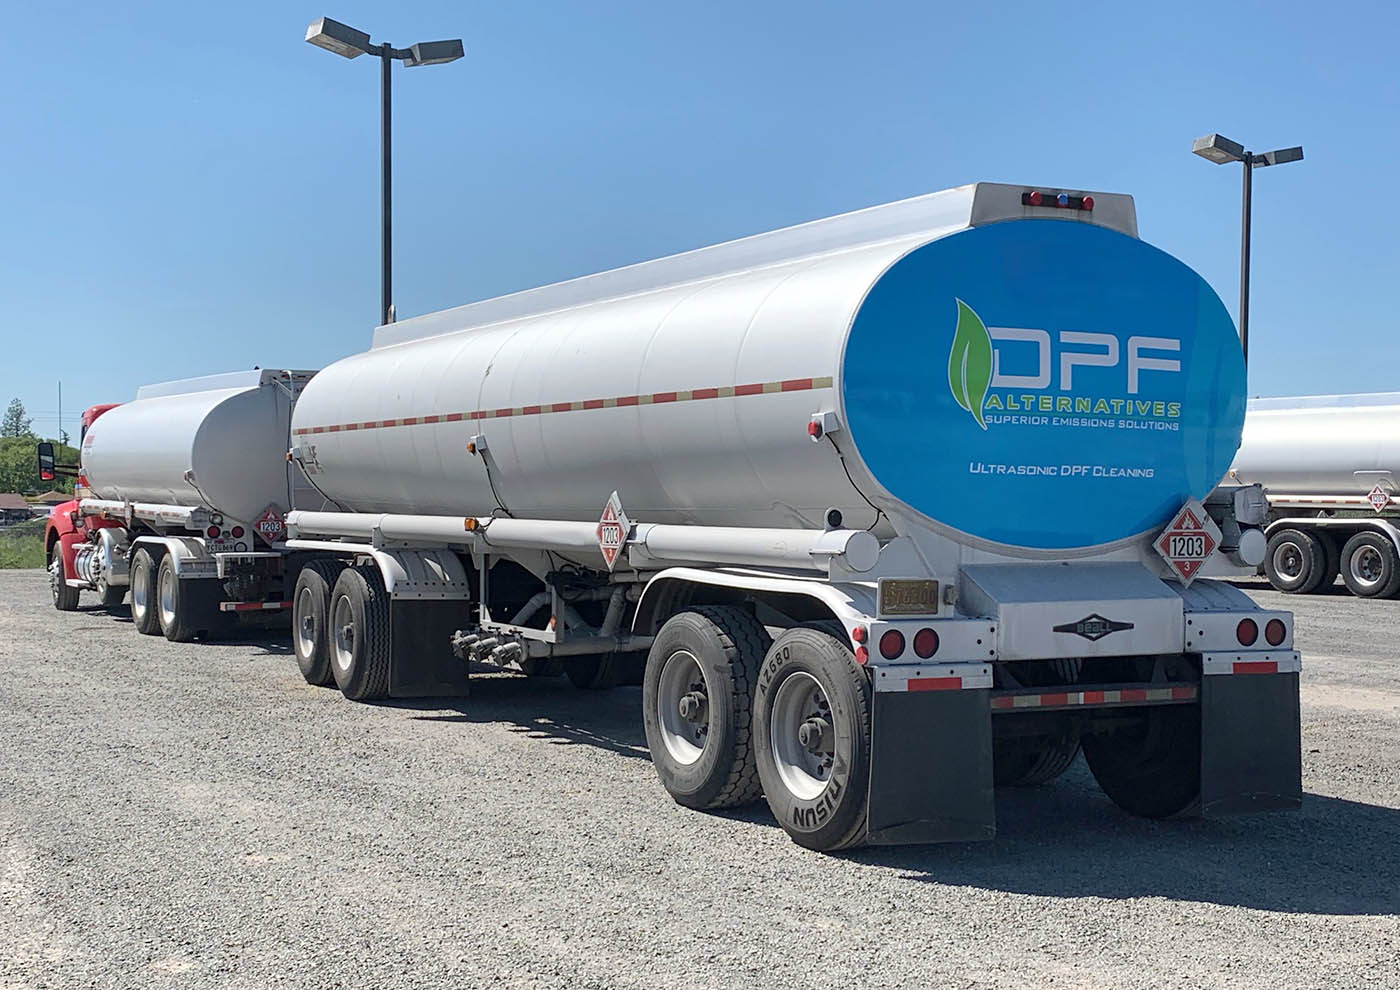 Back of a clean, large, reflective semi truck rig, contact DPF Alternatives for a DPF cleaning in Dallas, TX.